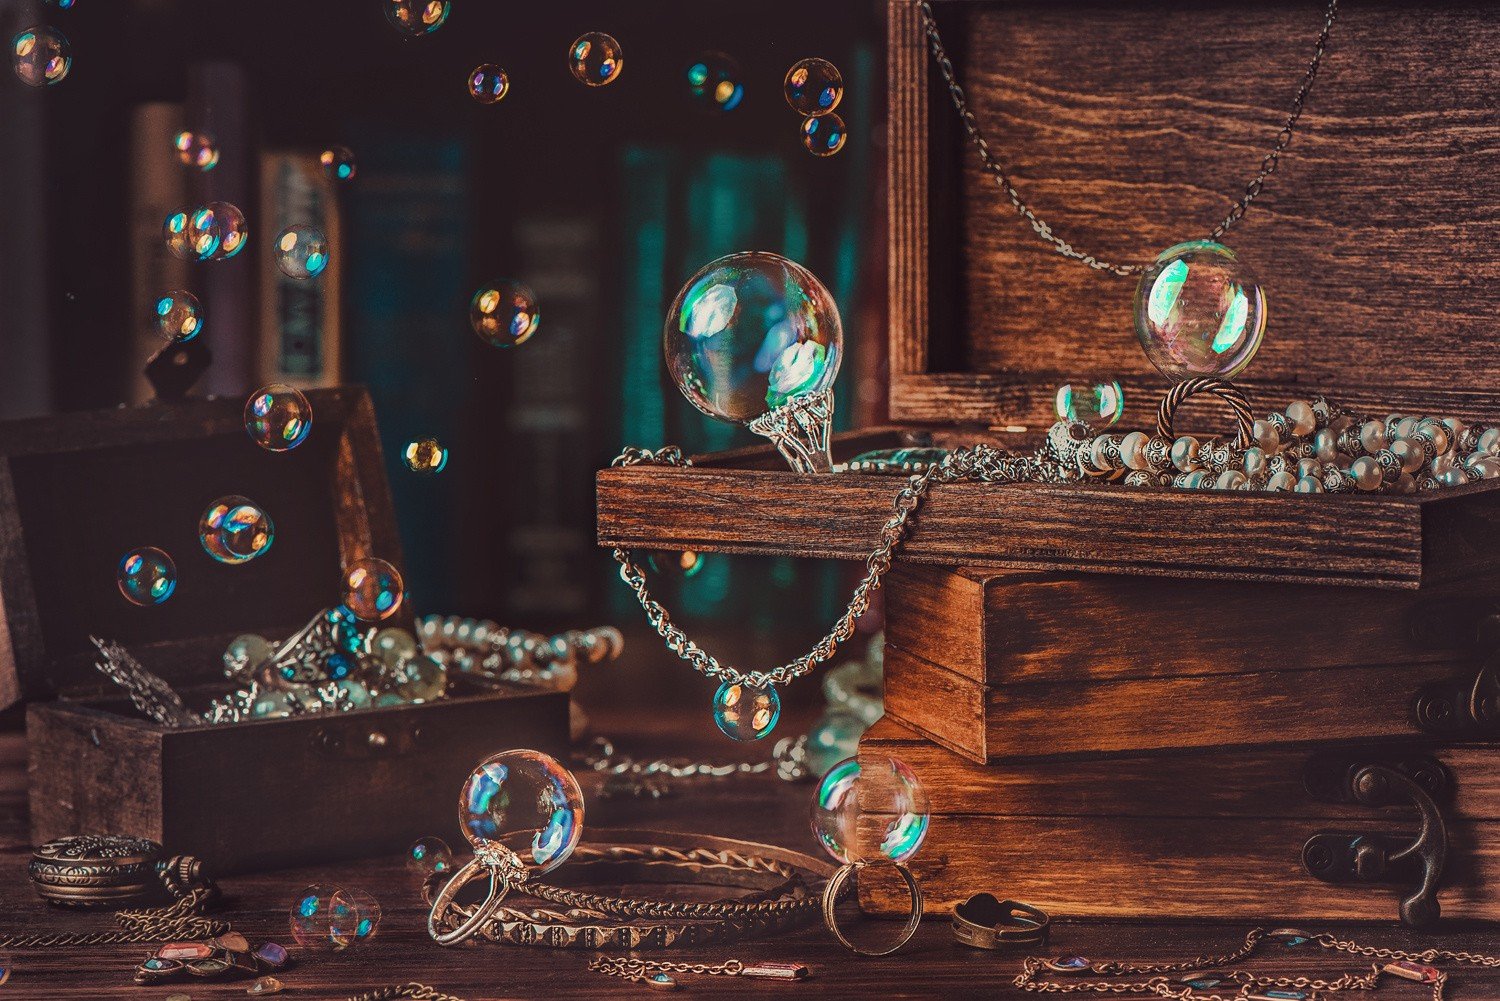 photography, Jewels, Bubbles, Boxes, Wood Wallpaper